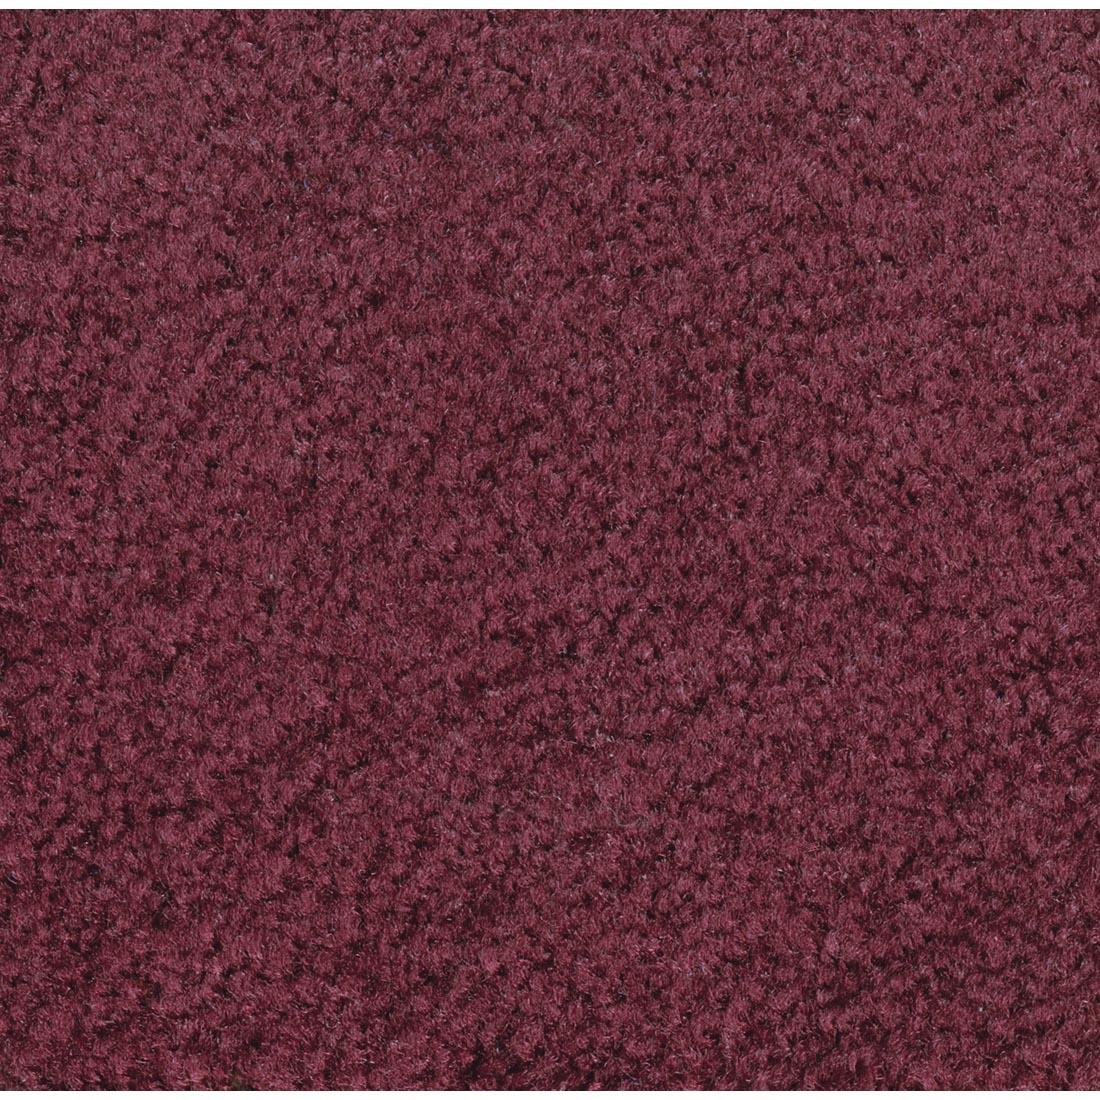 Cranberry-colored carpet swatch from the Rectangle Rug by Carpets For Kids